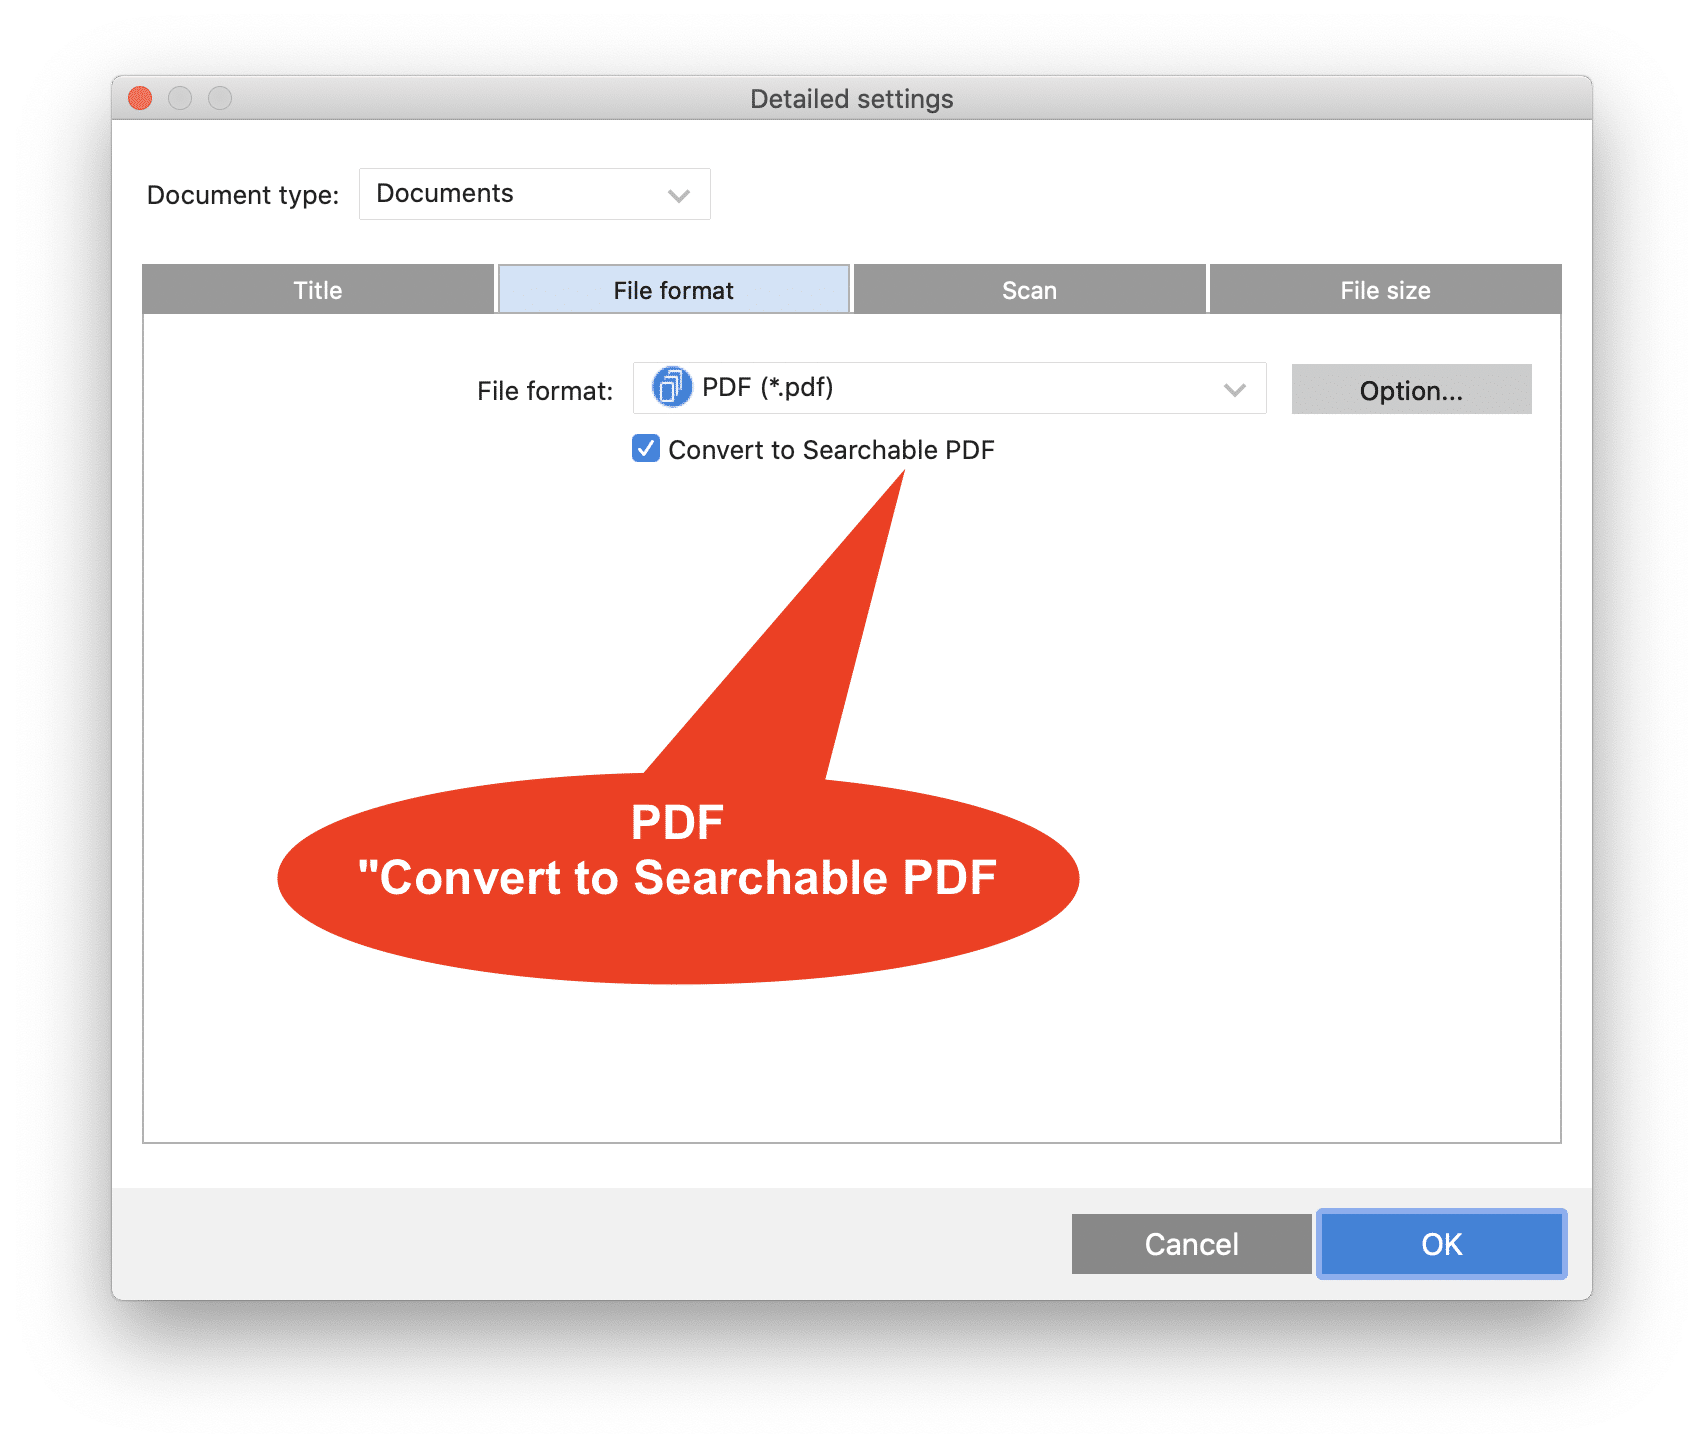 How To Download Scansnap Home Mac